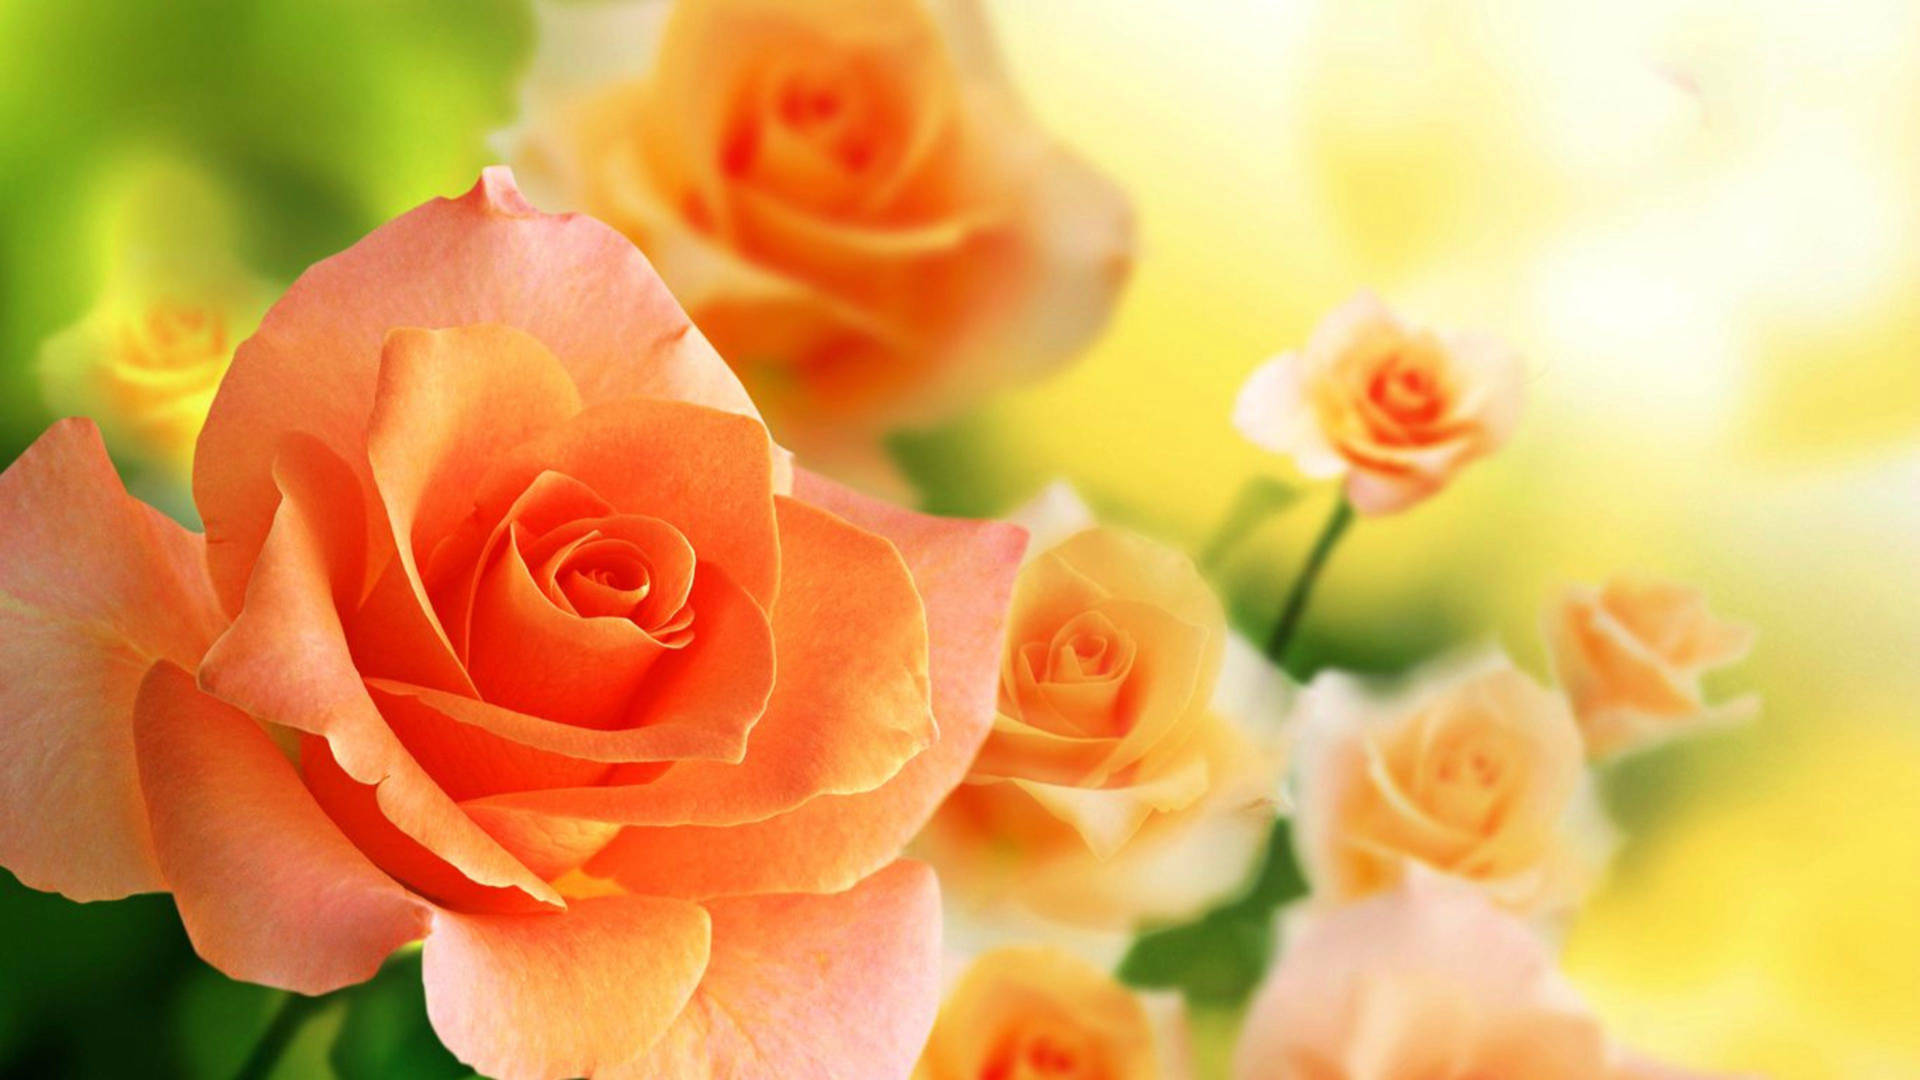 World's Most Beautiful Flowers Peach Roses Background